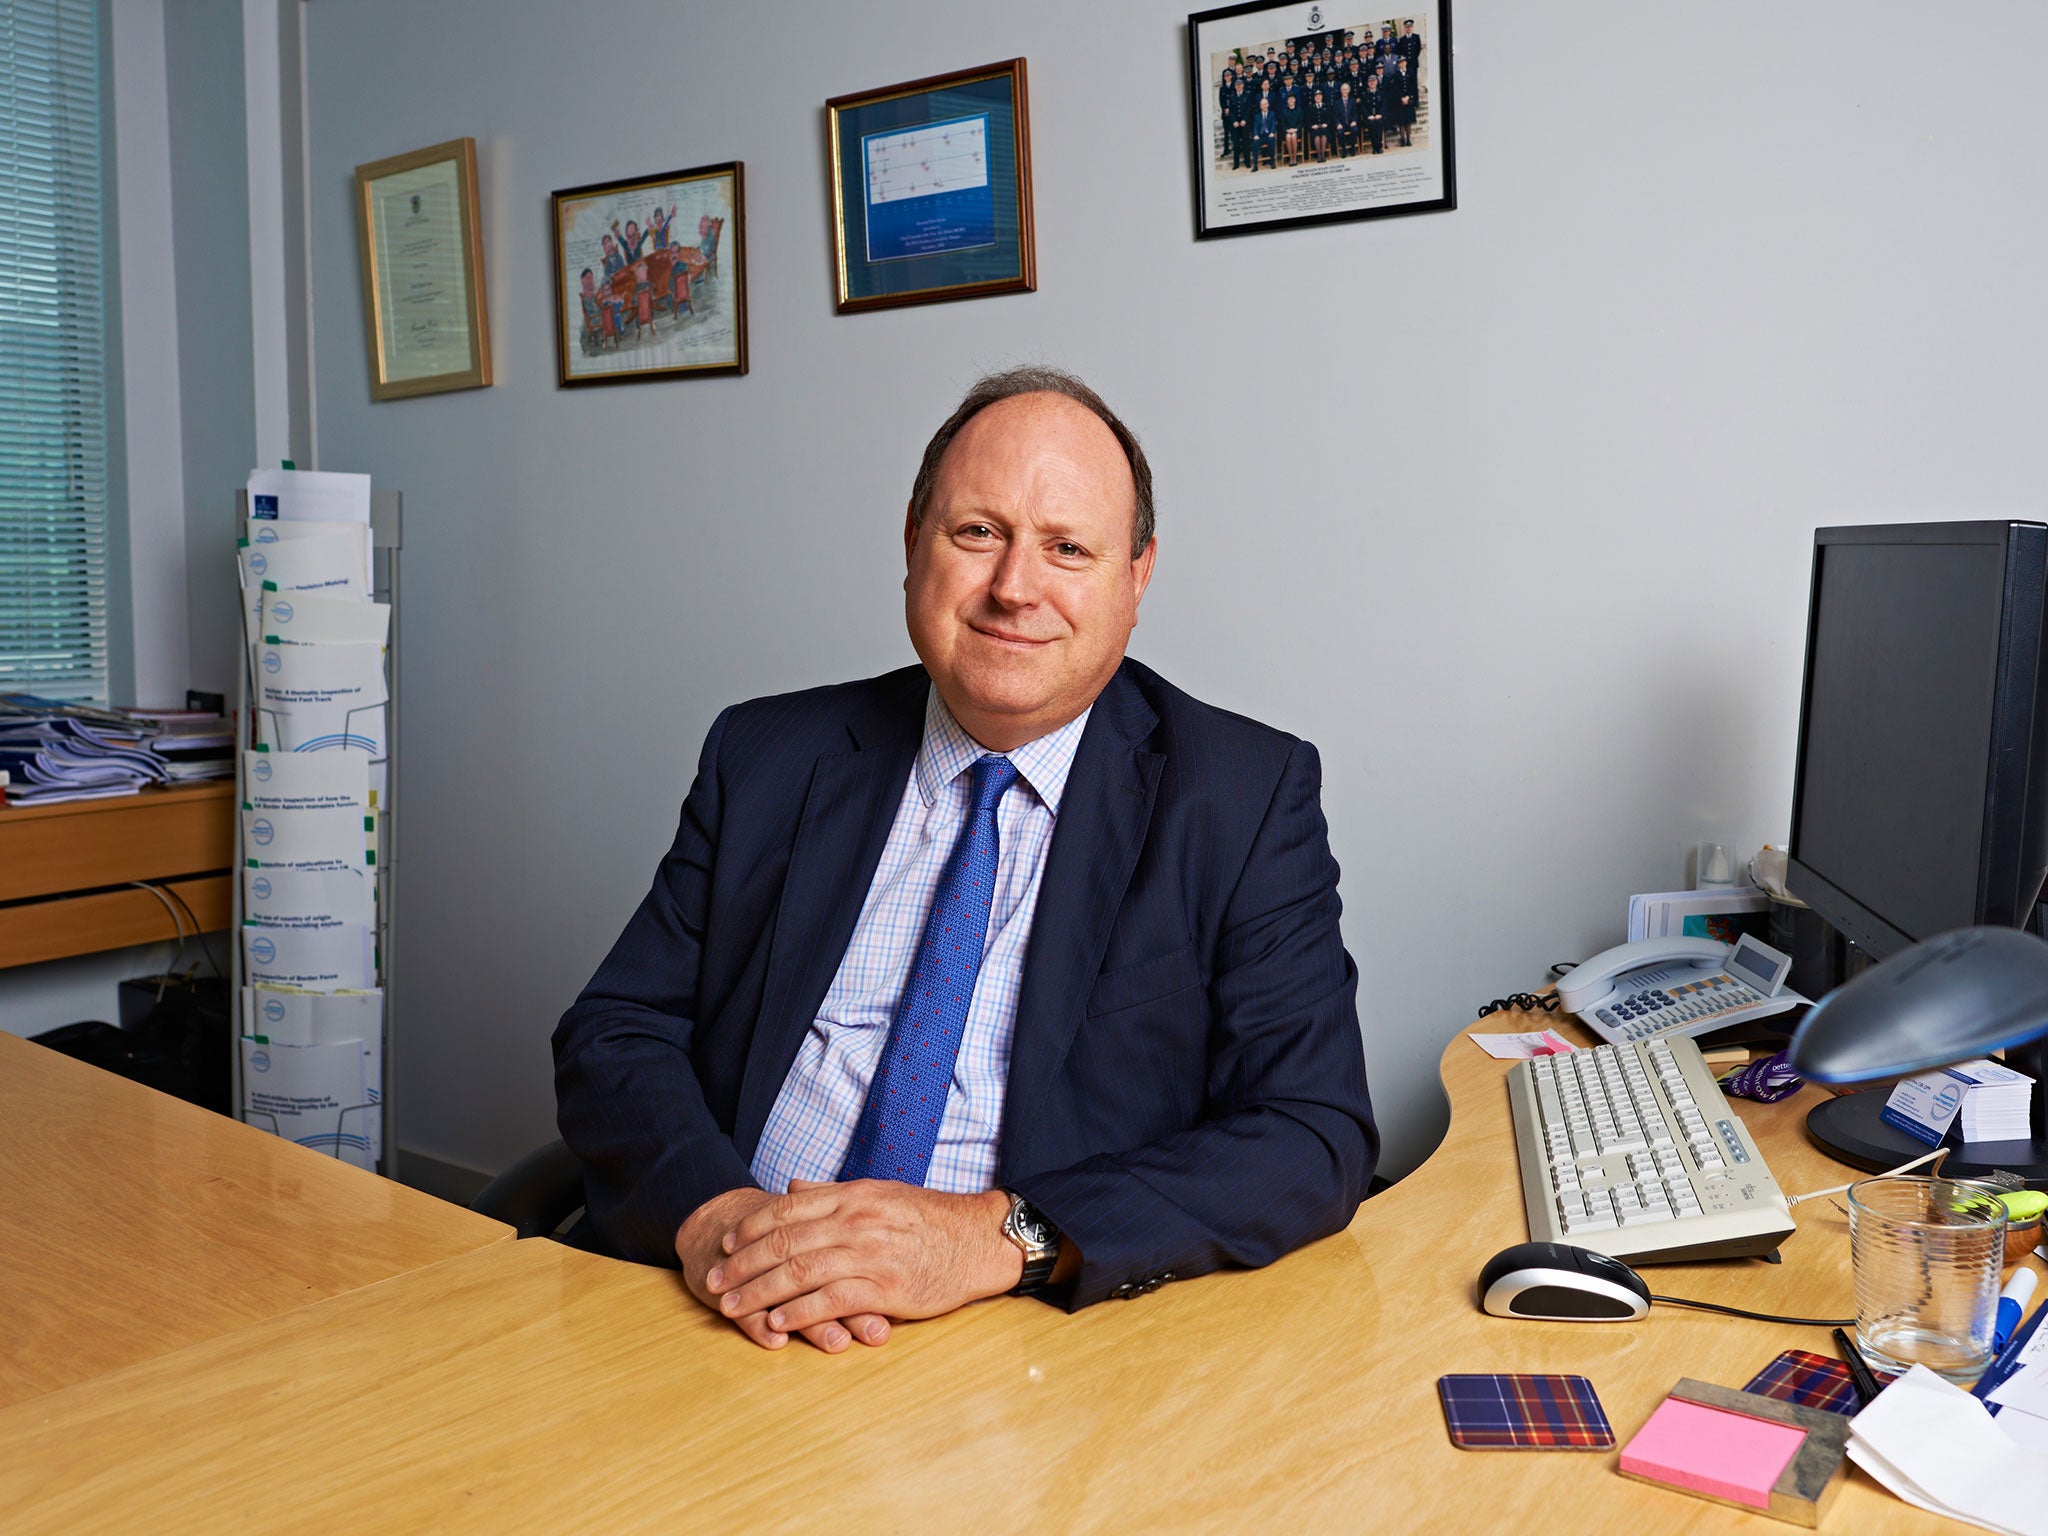 John Vine, former Independent Chief Inspector of Borders and Immigration